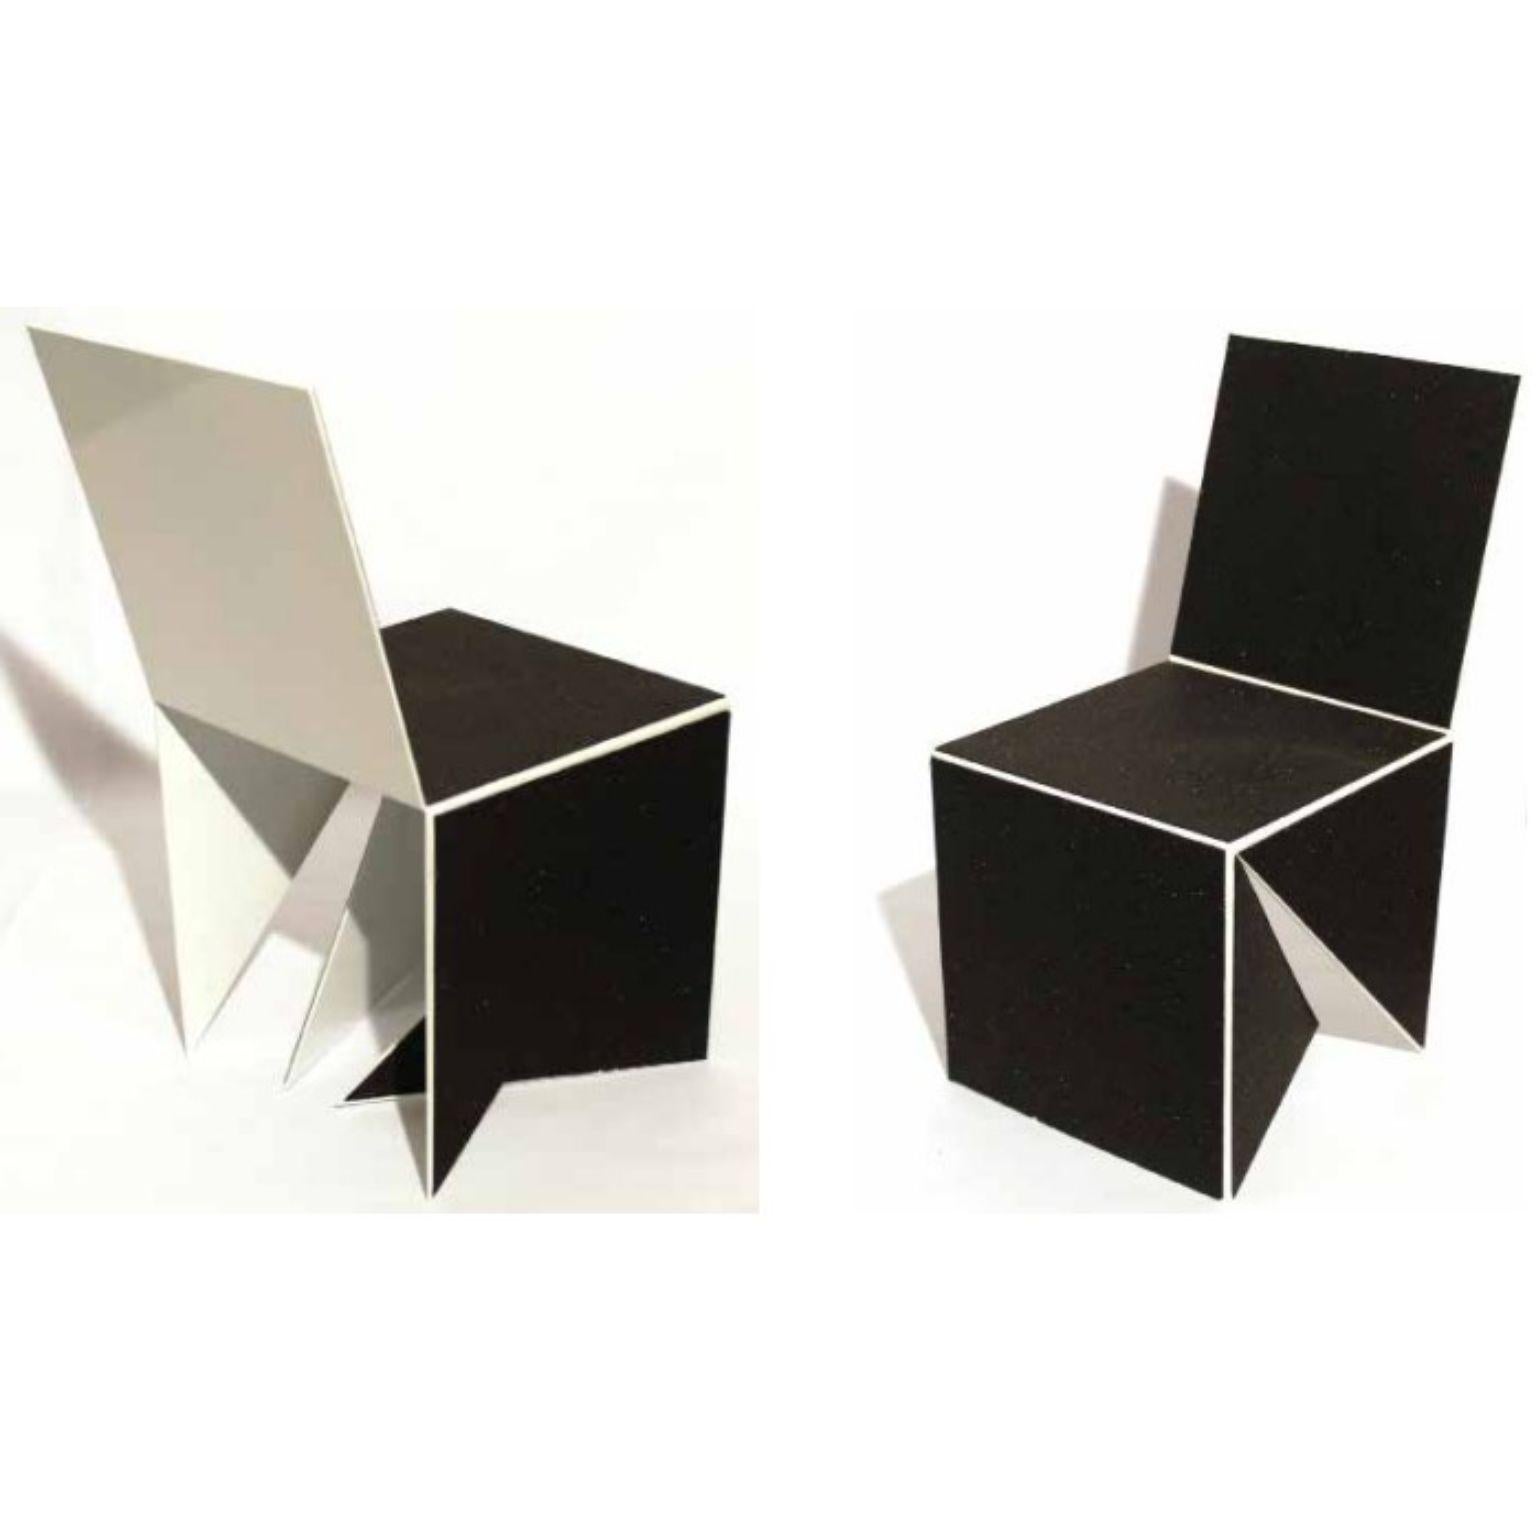 Post-Modern Casulo Cube #2 by Mameluca For Sale